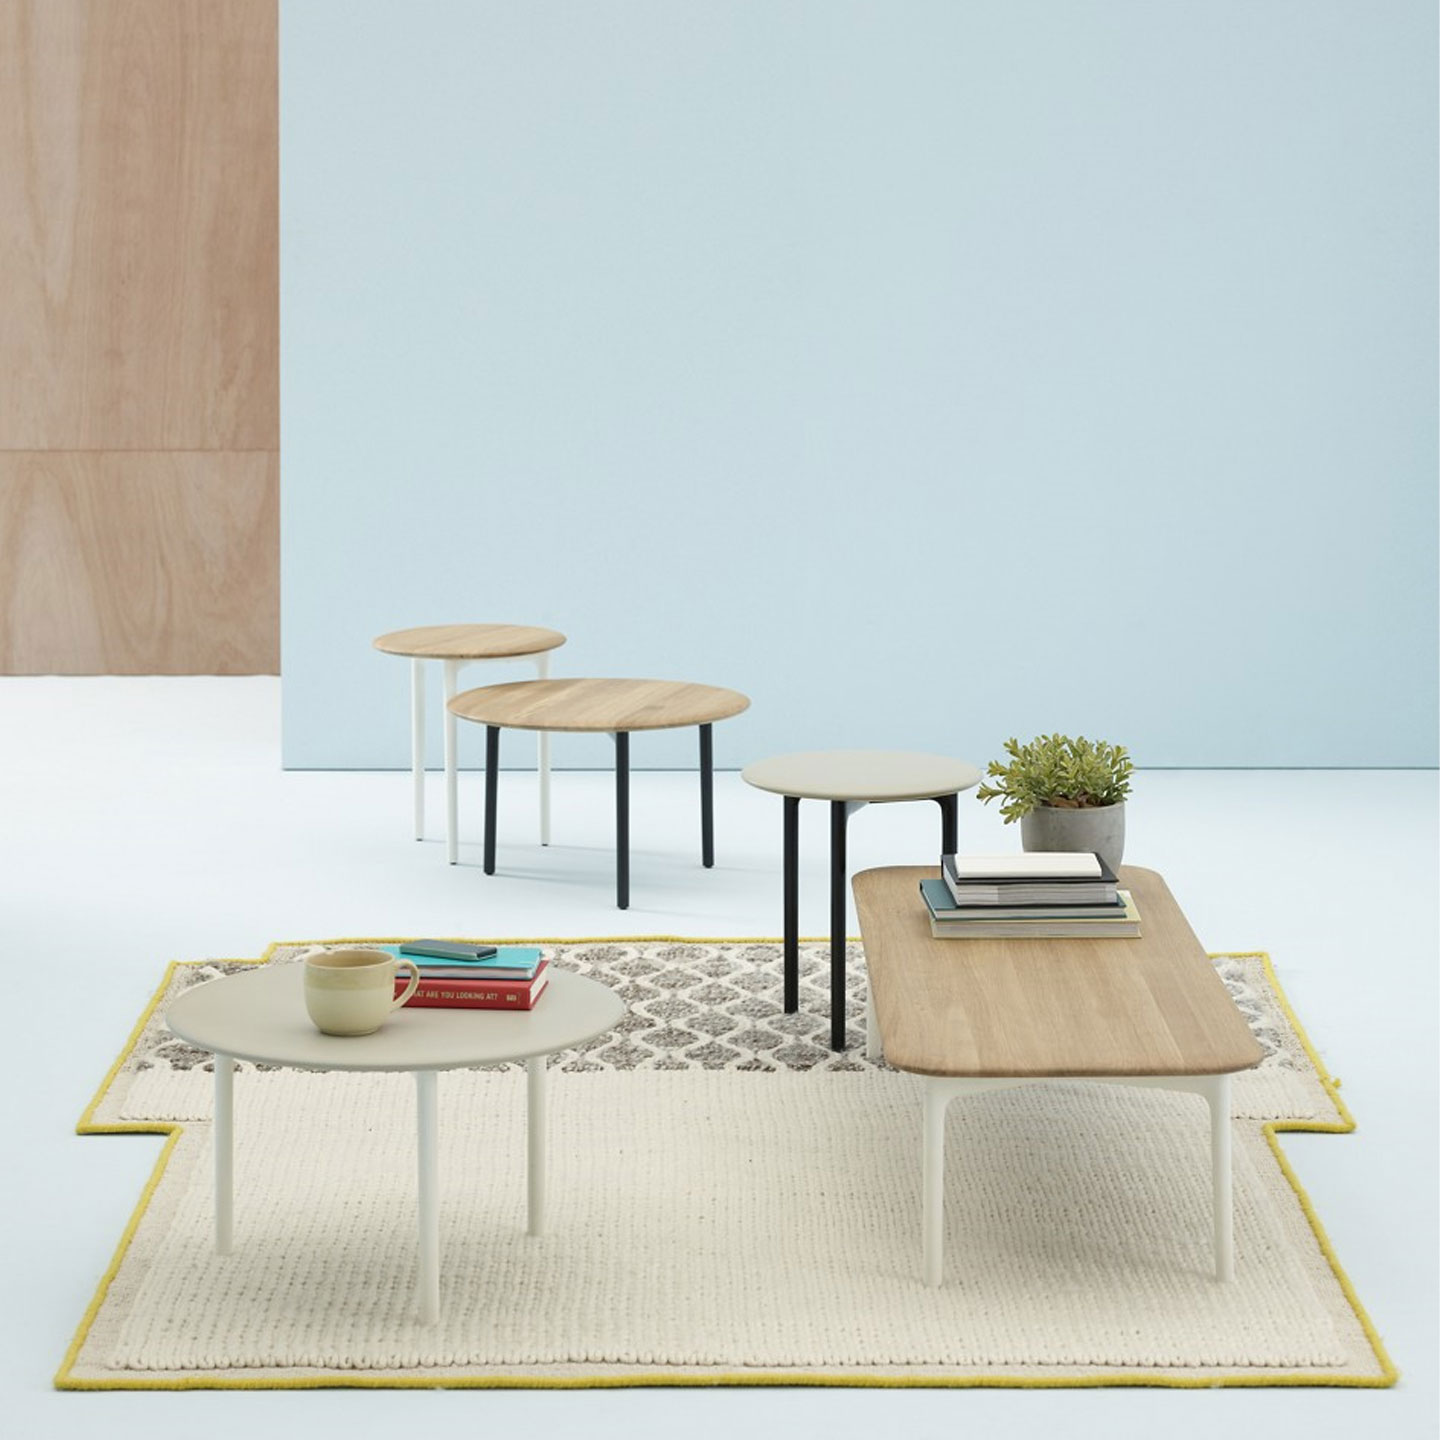 Haworth Openest Sprig Side Table as a book table with multiple colors